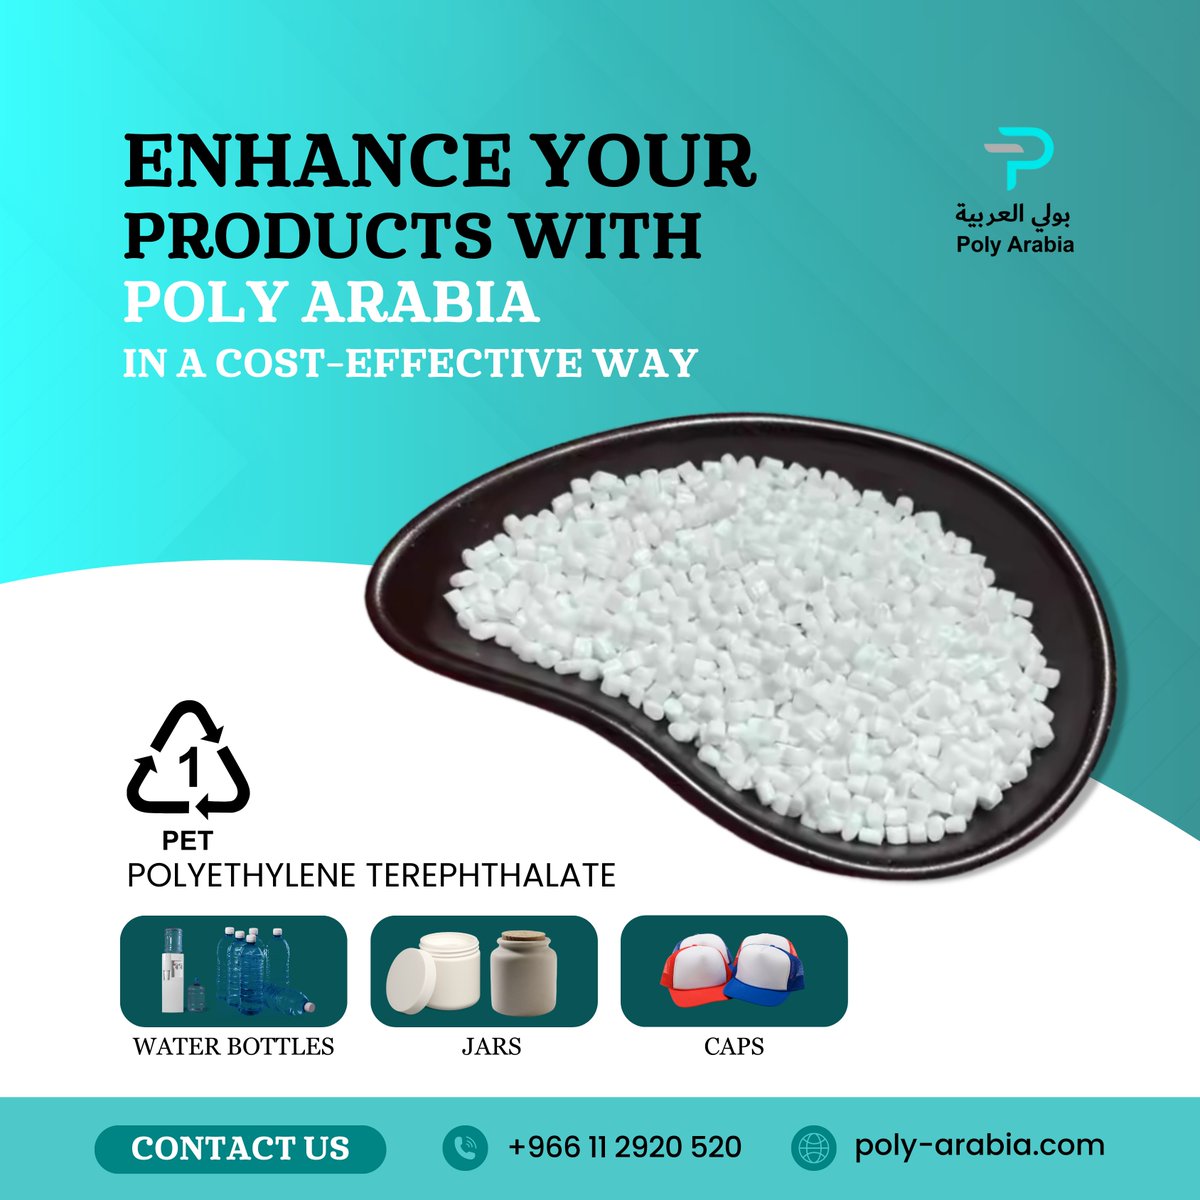 Enhance your product with Poly Arabia ~ In a cost effective way

Our Services :-
> Polymer Supplies
> Marketing & Distribution
> Supply chain Services
> Financial Services etc.

#PolyArabia #PlasticInnovation #RawMaterials #SustainablePlastics #InnovateWithPolyArabia